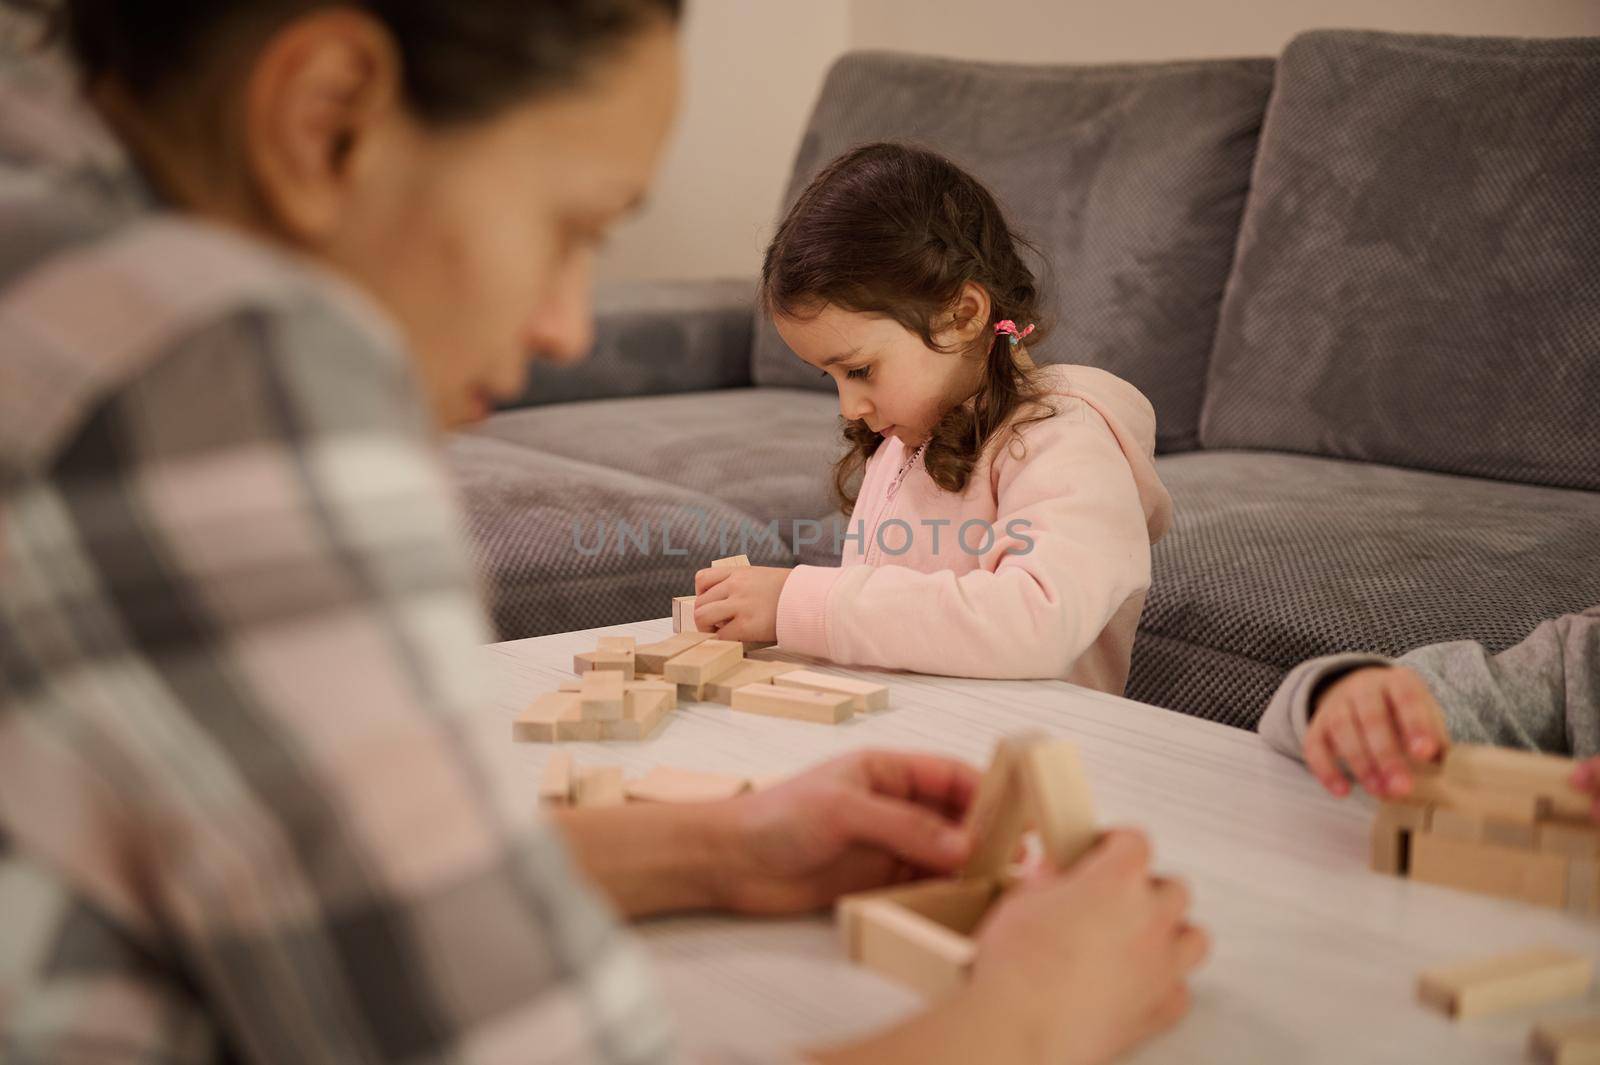 Concentrated little European girl builds constructions with wooden blocks, developing her fine motor skills, sitting at table with her blurred mother on the foreground, focused on building structures